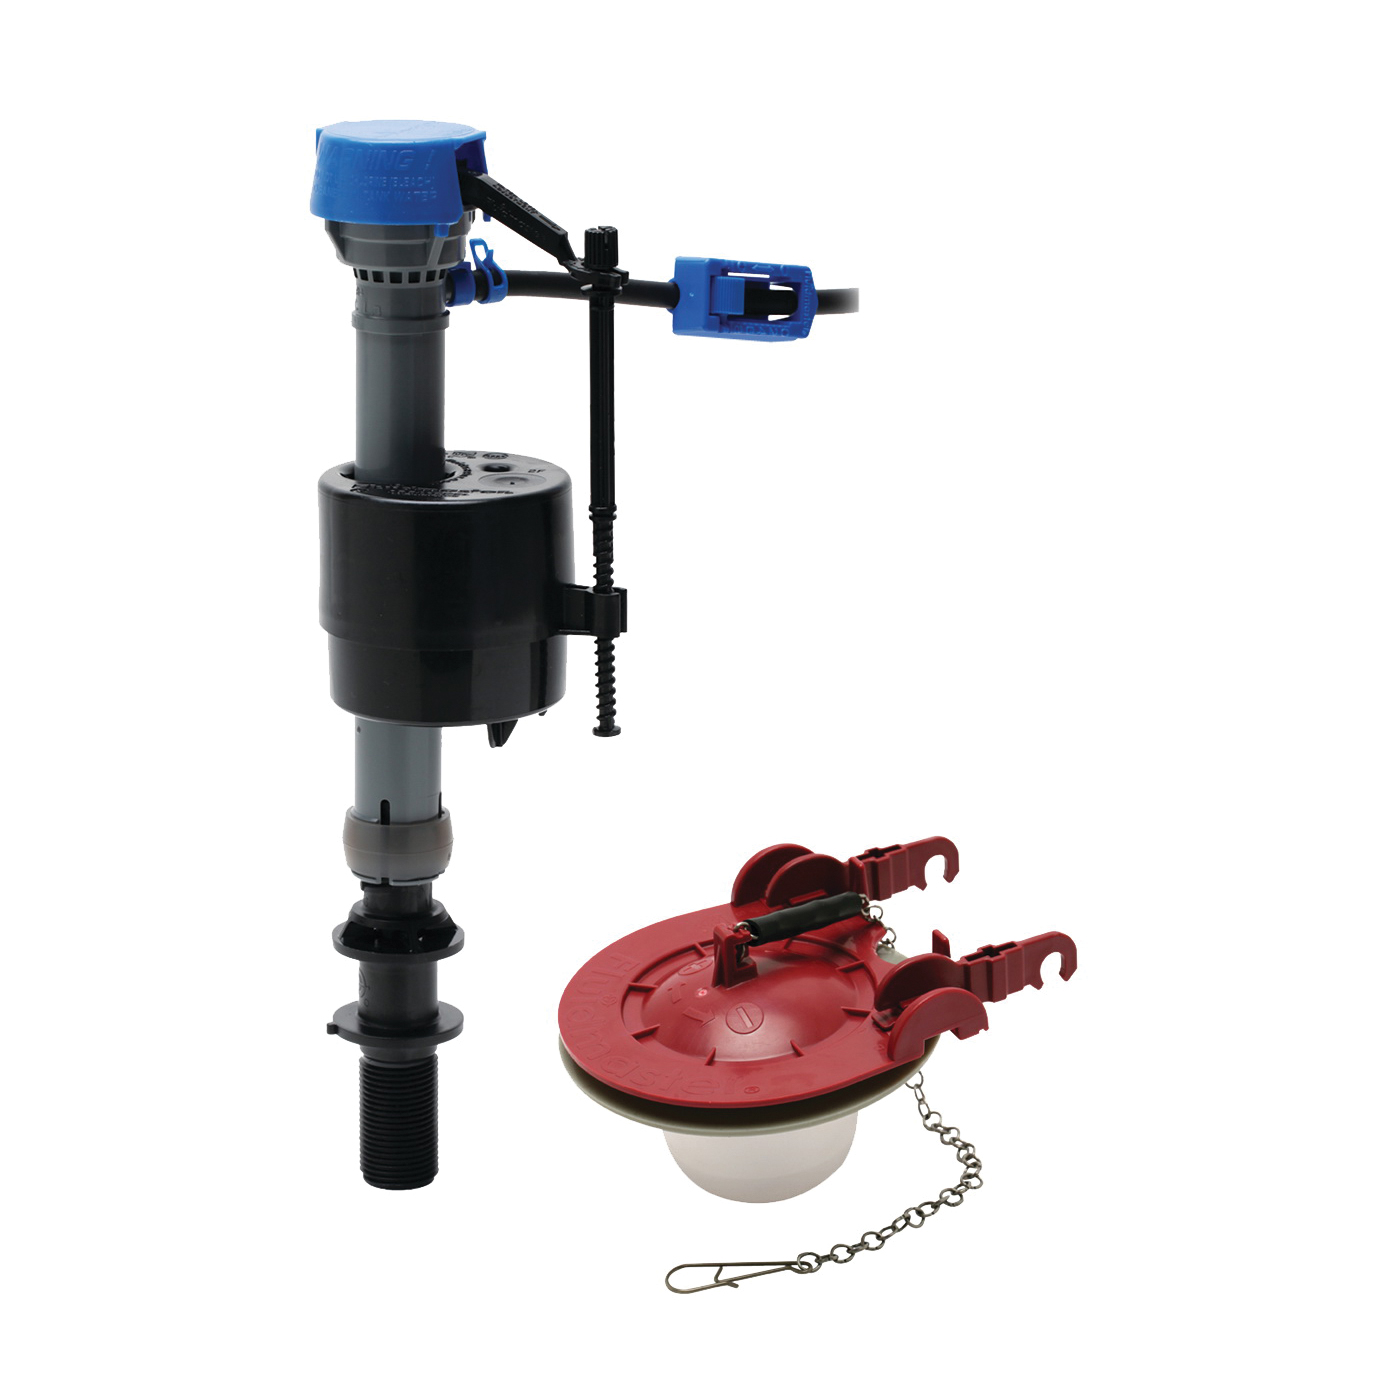 PerforMAX Series 400CAR3P5 Toilet Fill Valve and Flapper Kit, Plastic Body, Anti-Siphon: Yes